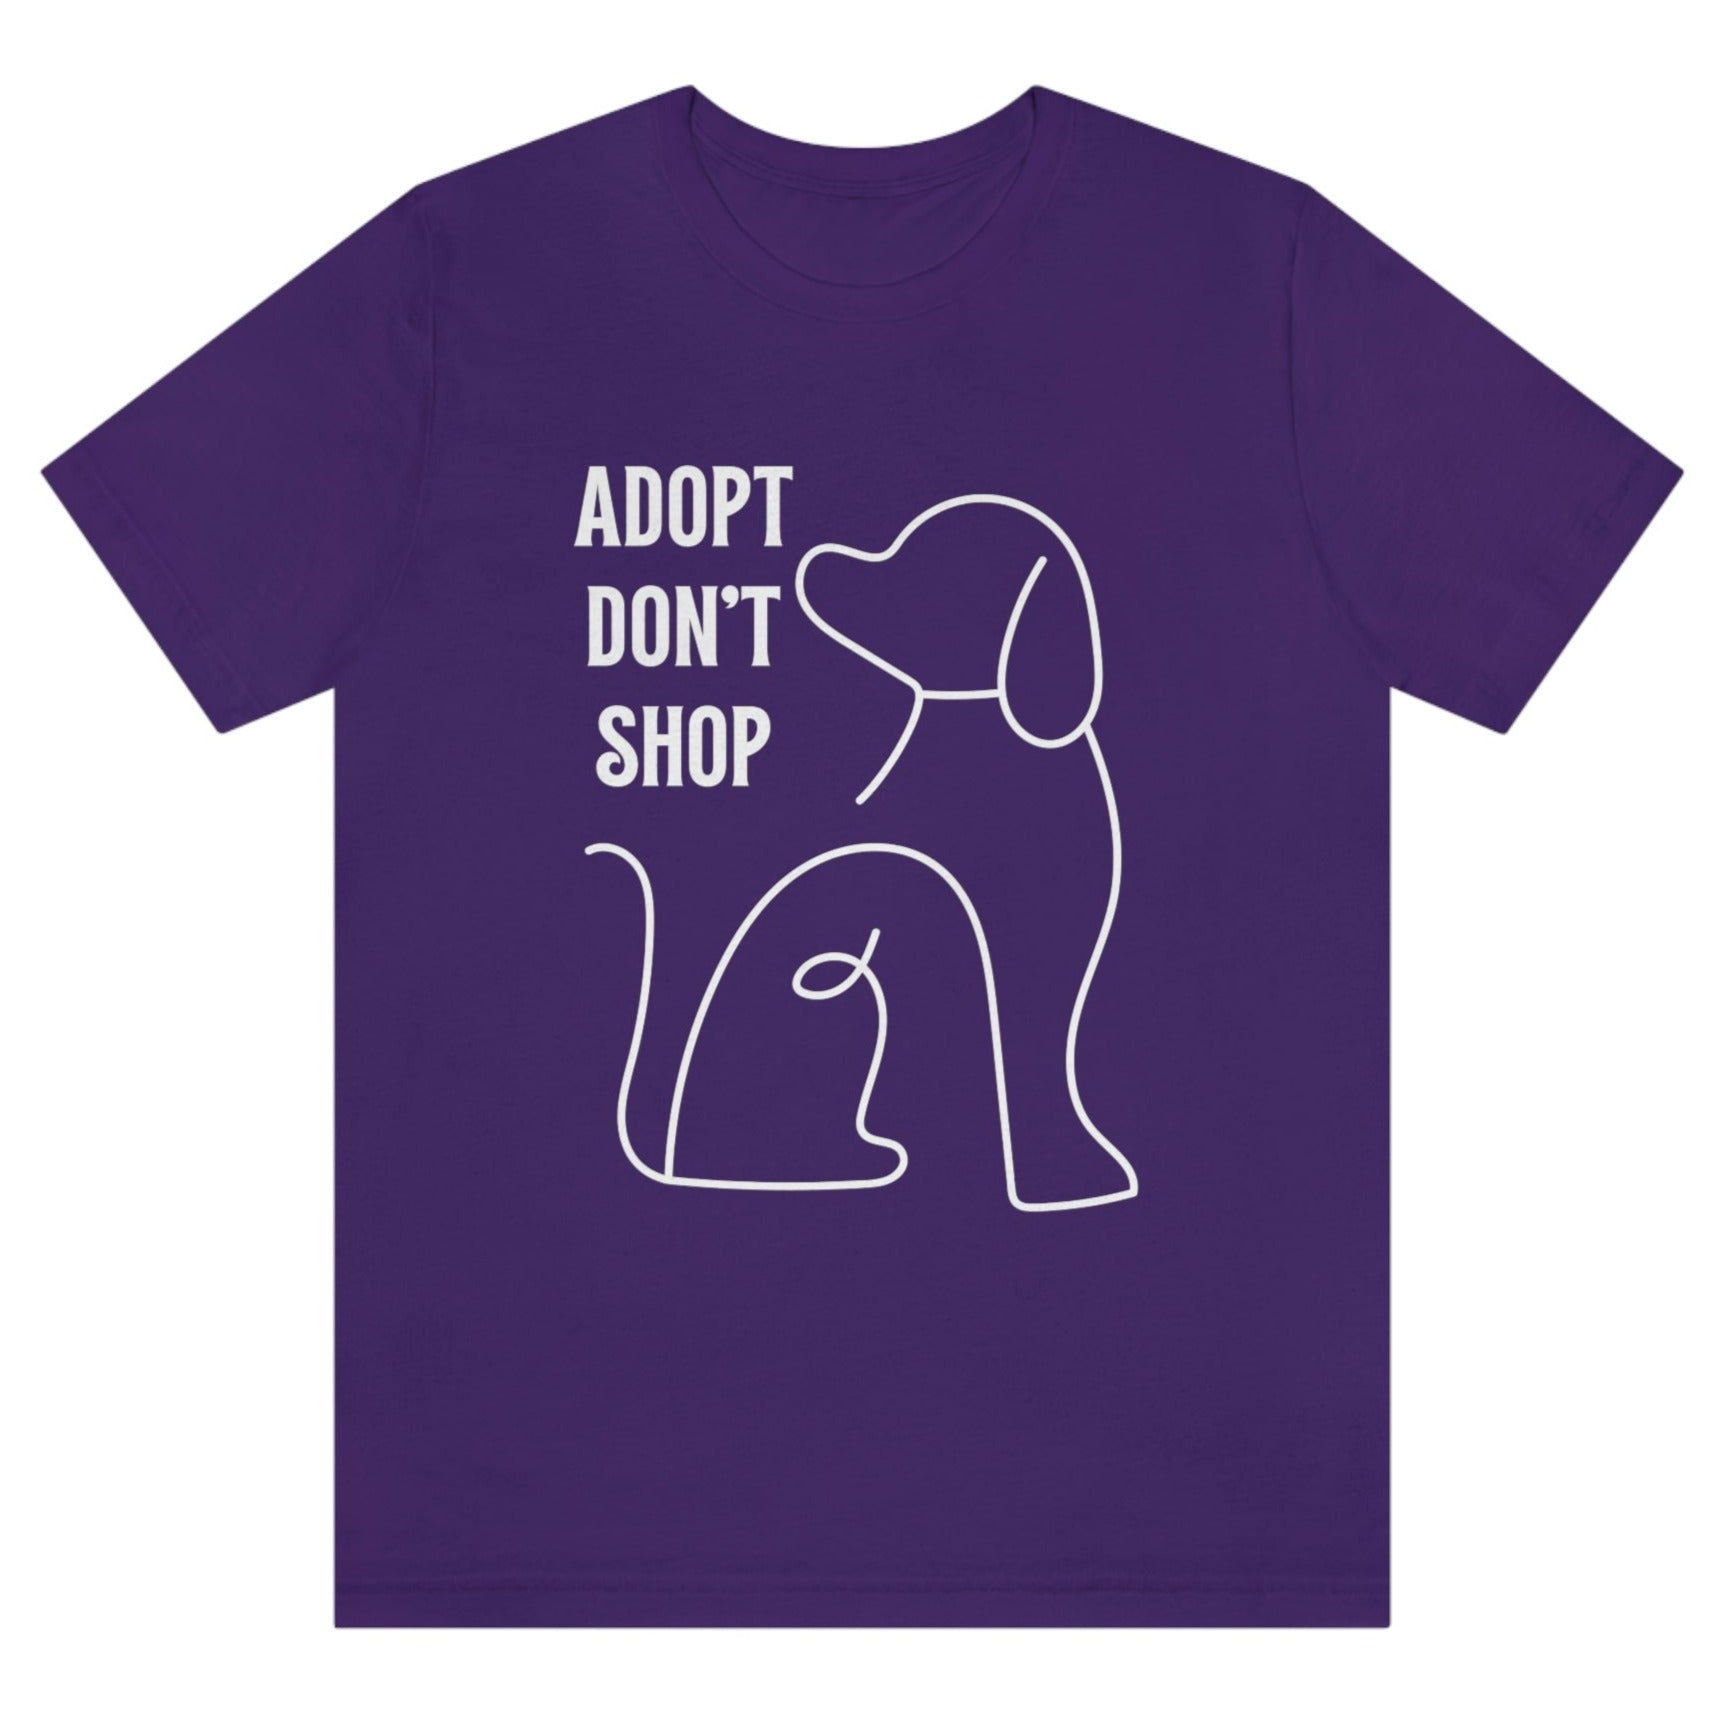 adopt-dont-shop-team-purple-t-shirt-with-dog-graphic-unisex